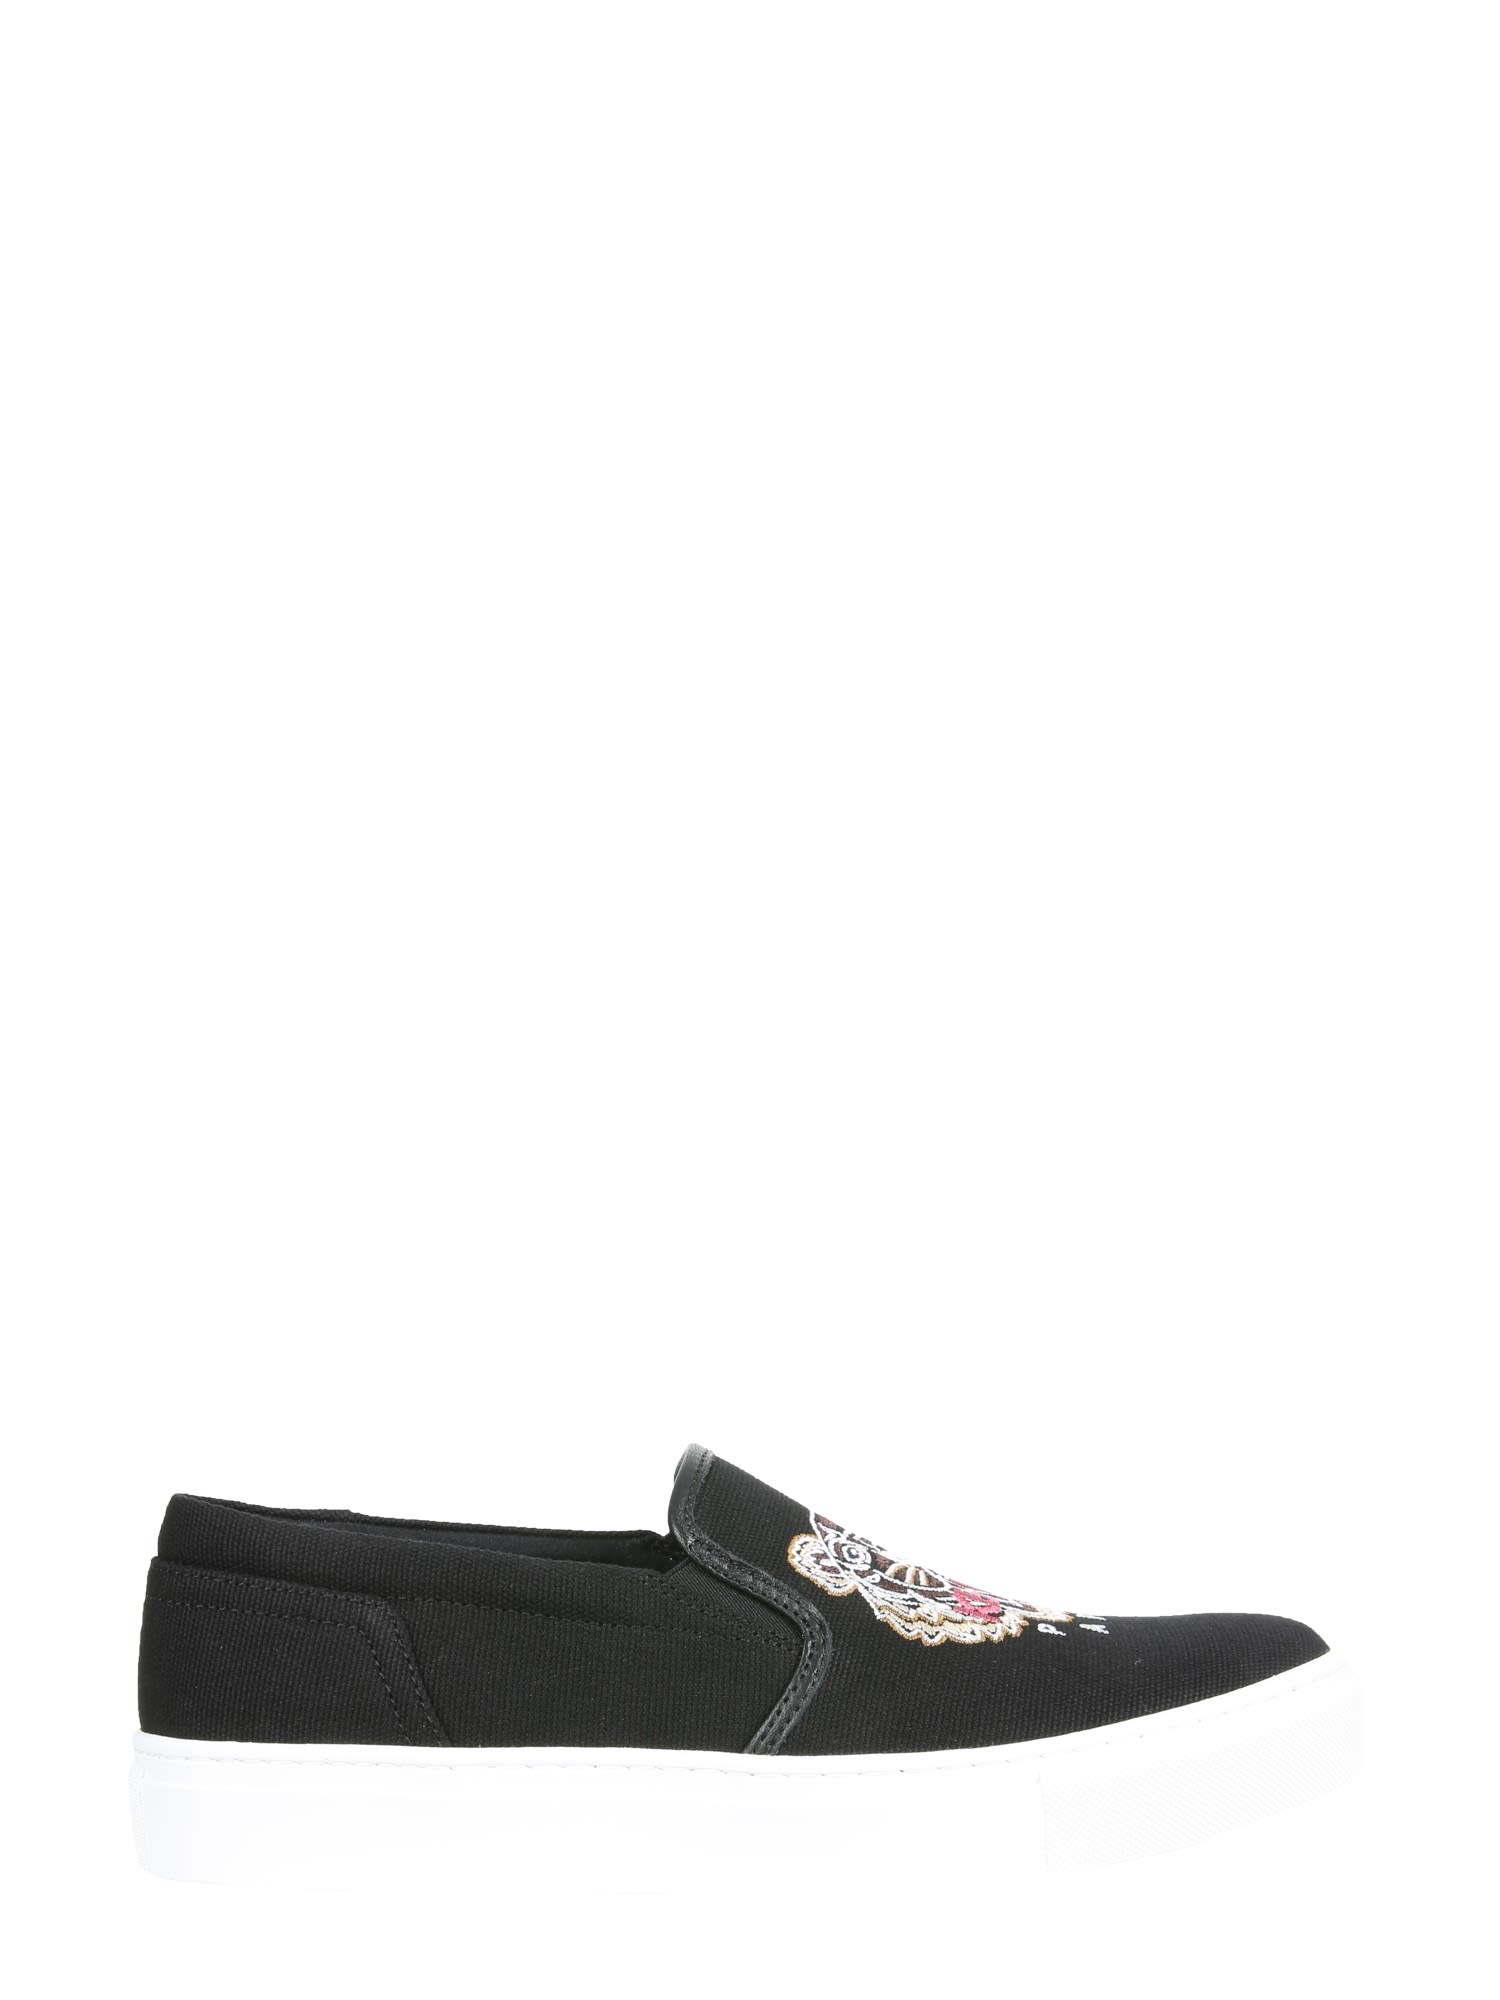 Buy Kenzo K-skate Slip Ons online, shop Kenzo shoes with free shipping